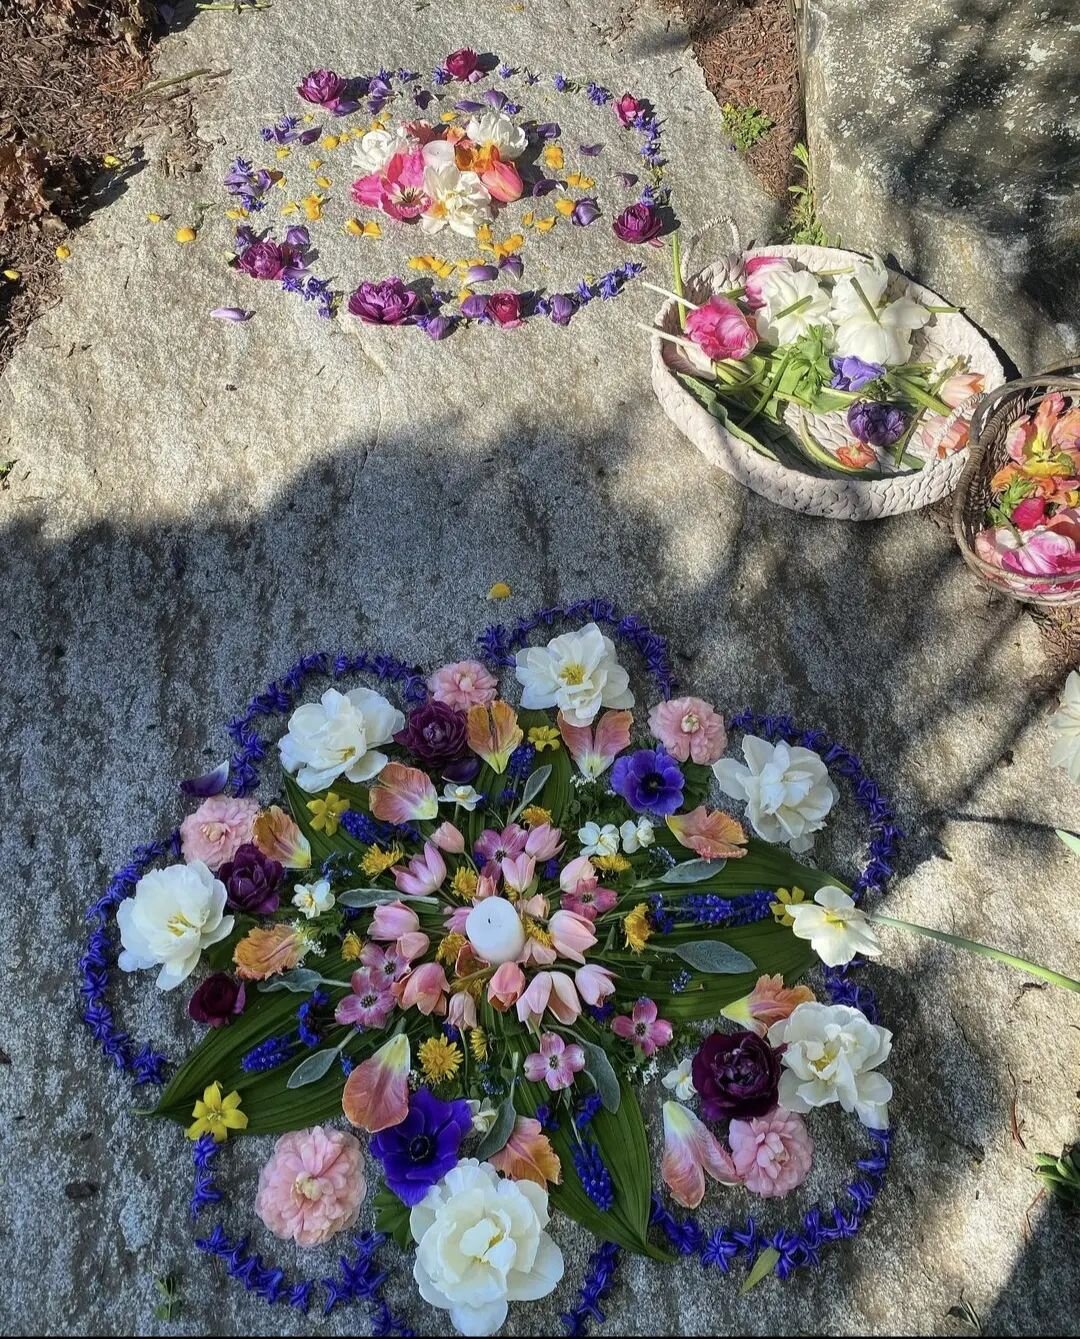 It's a busy week here at Anderson Acres! Lots of orders from @connecticutflowercollective plus our own farm orders and store prep!! But we can't forget to stop and *create beautiful mandalas* with flowers along the way!! This mandala was created by o